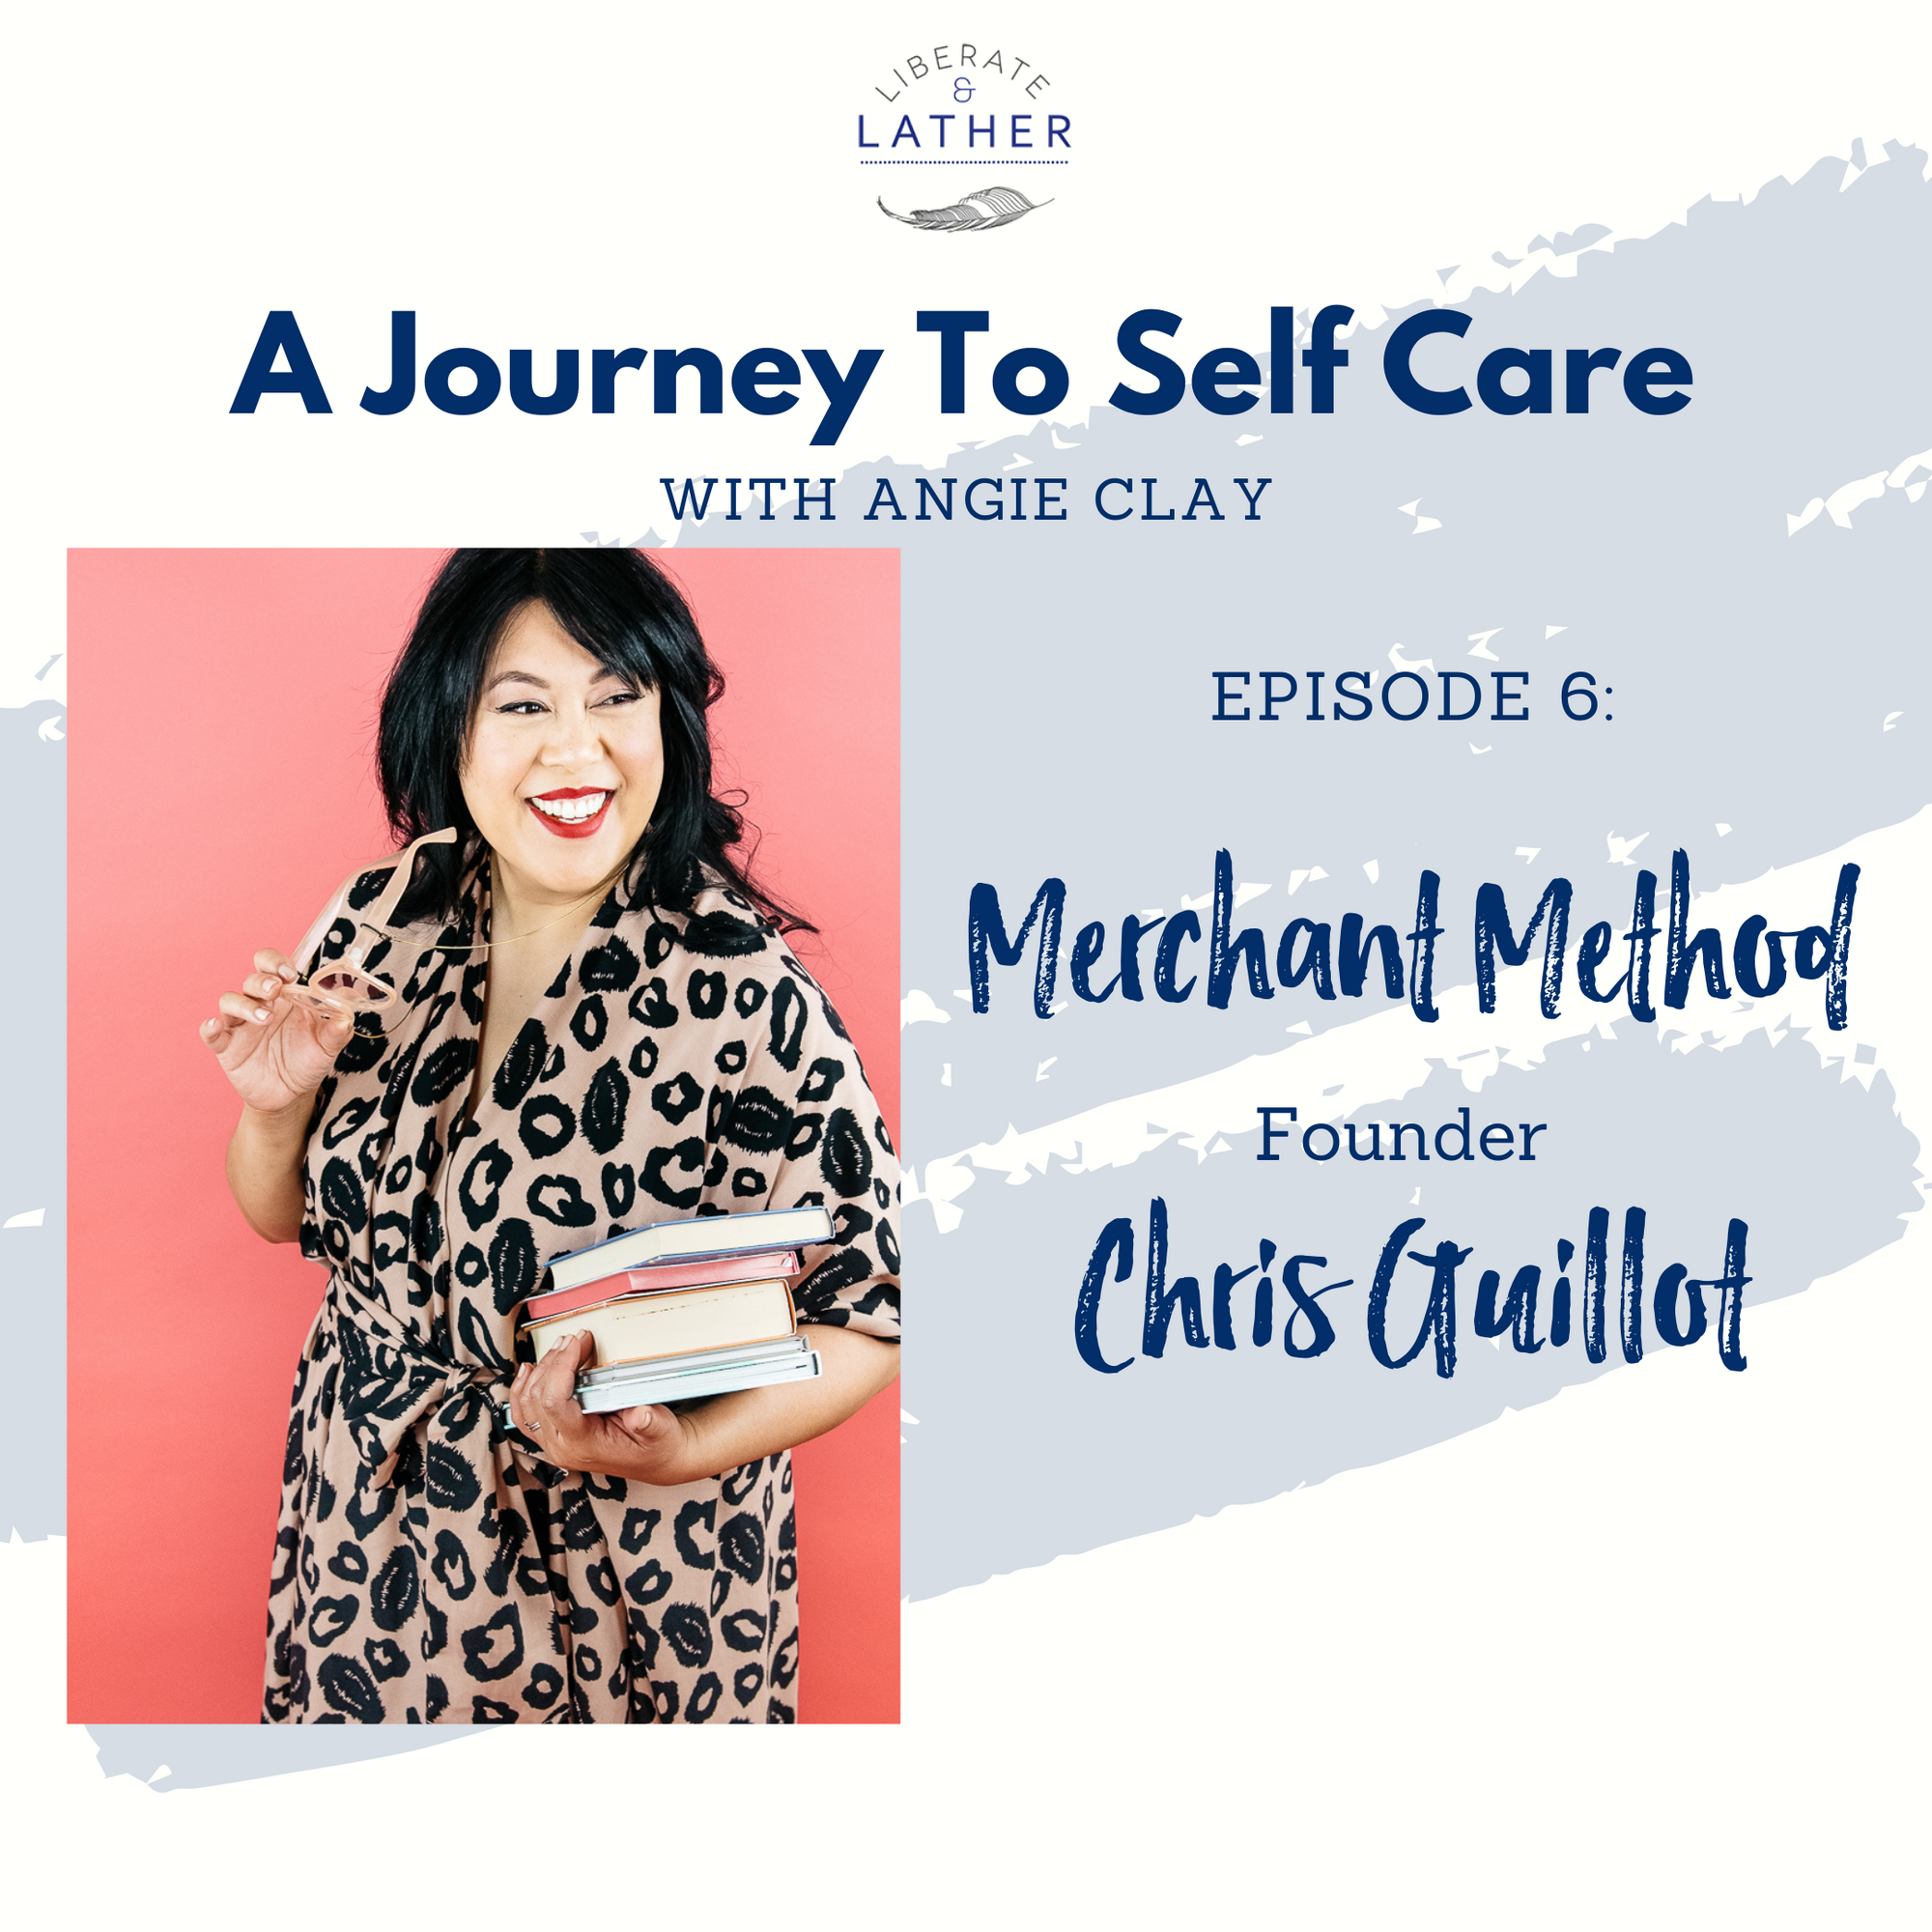 How Do We Refocus Our Business to Work From Home? With Chris Guillot from Merchant Method